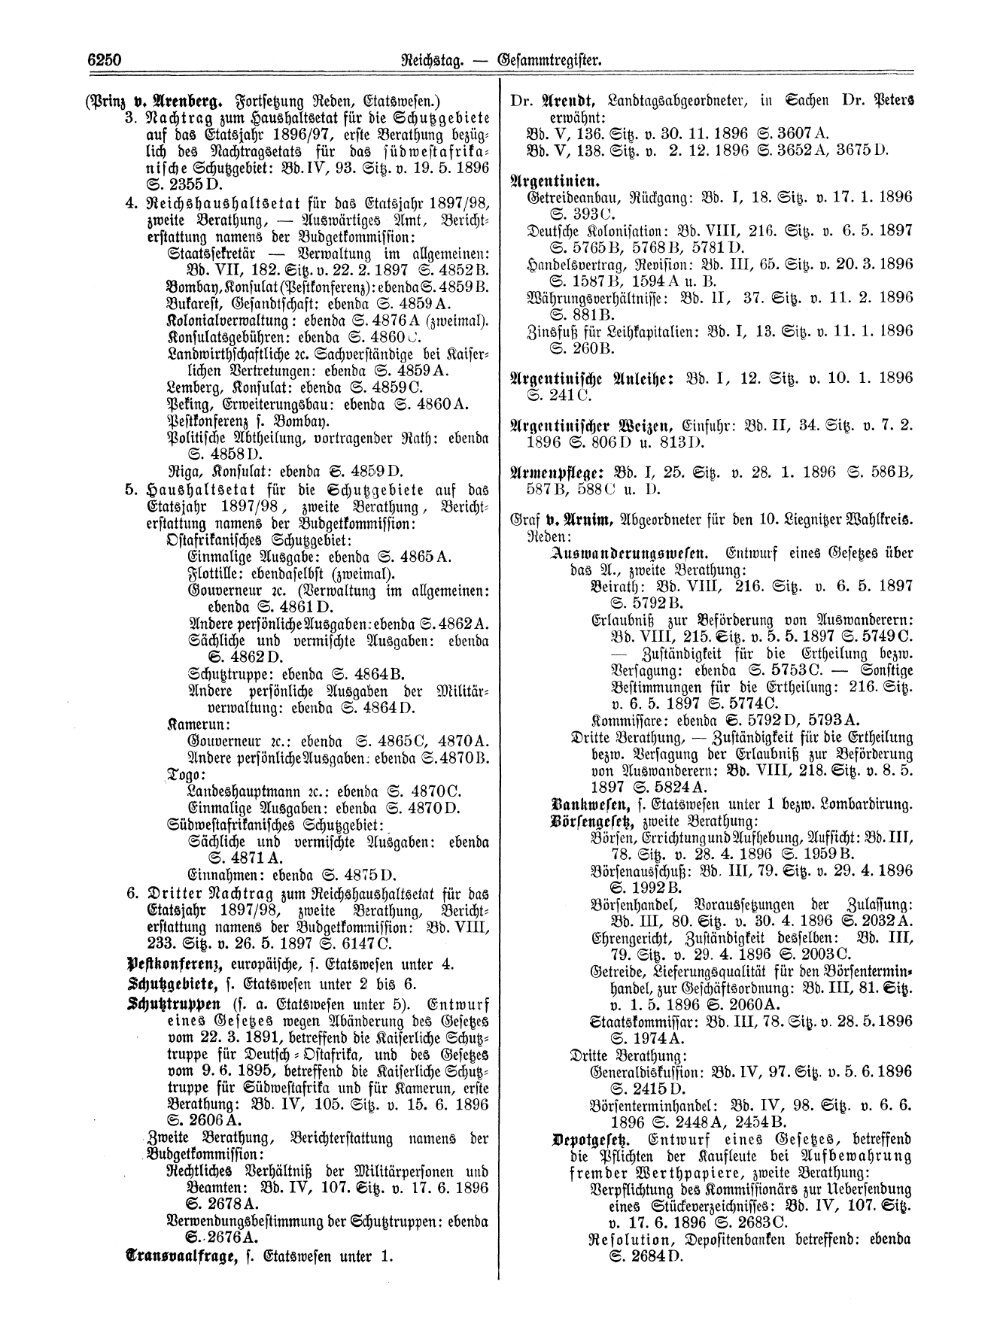 Scan of page 6250